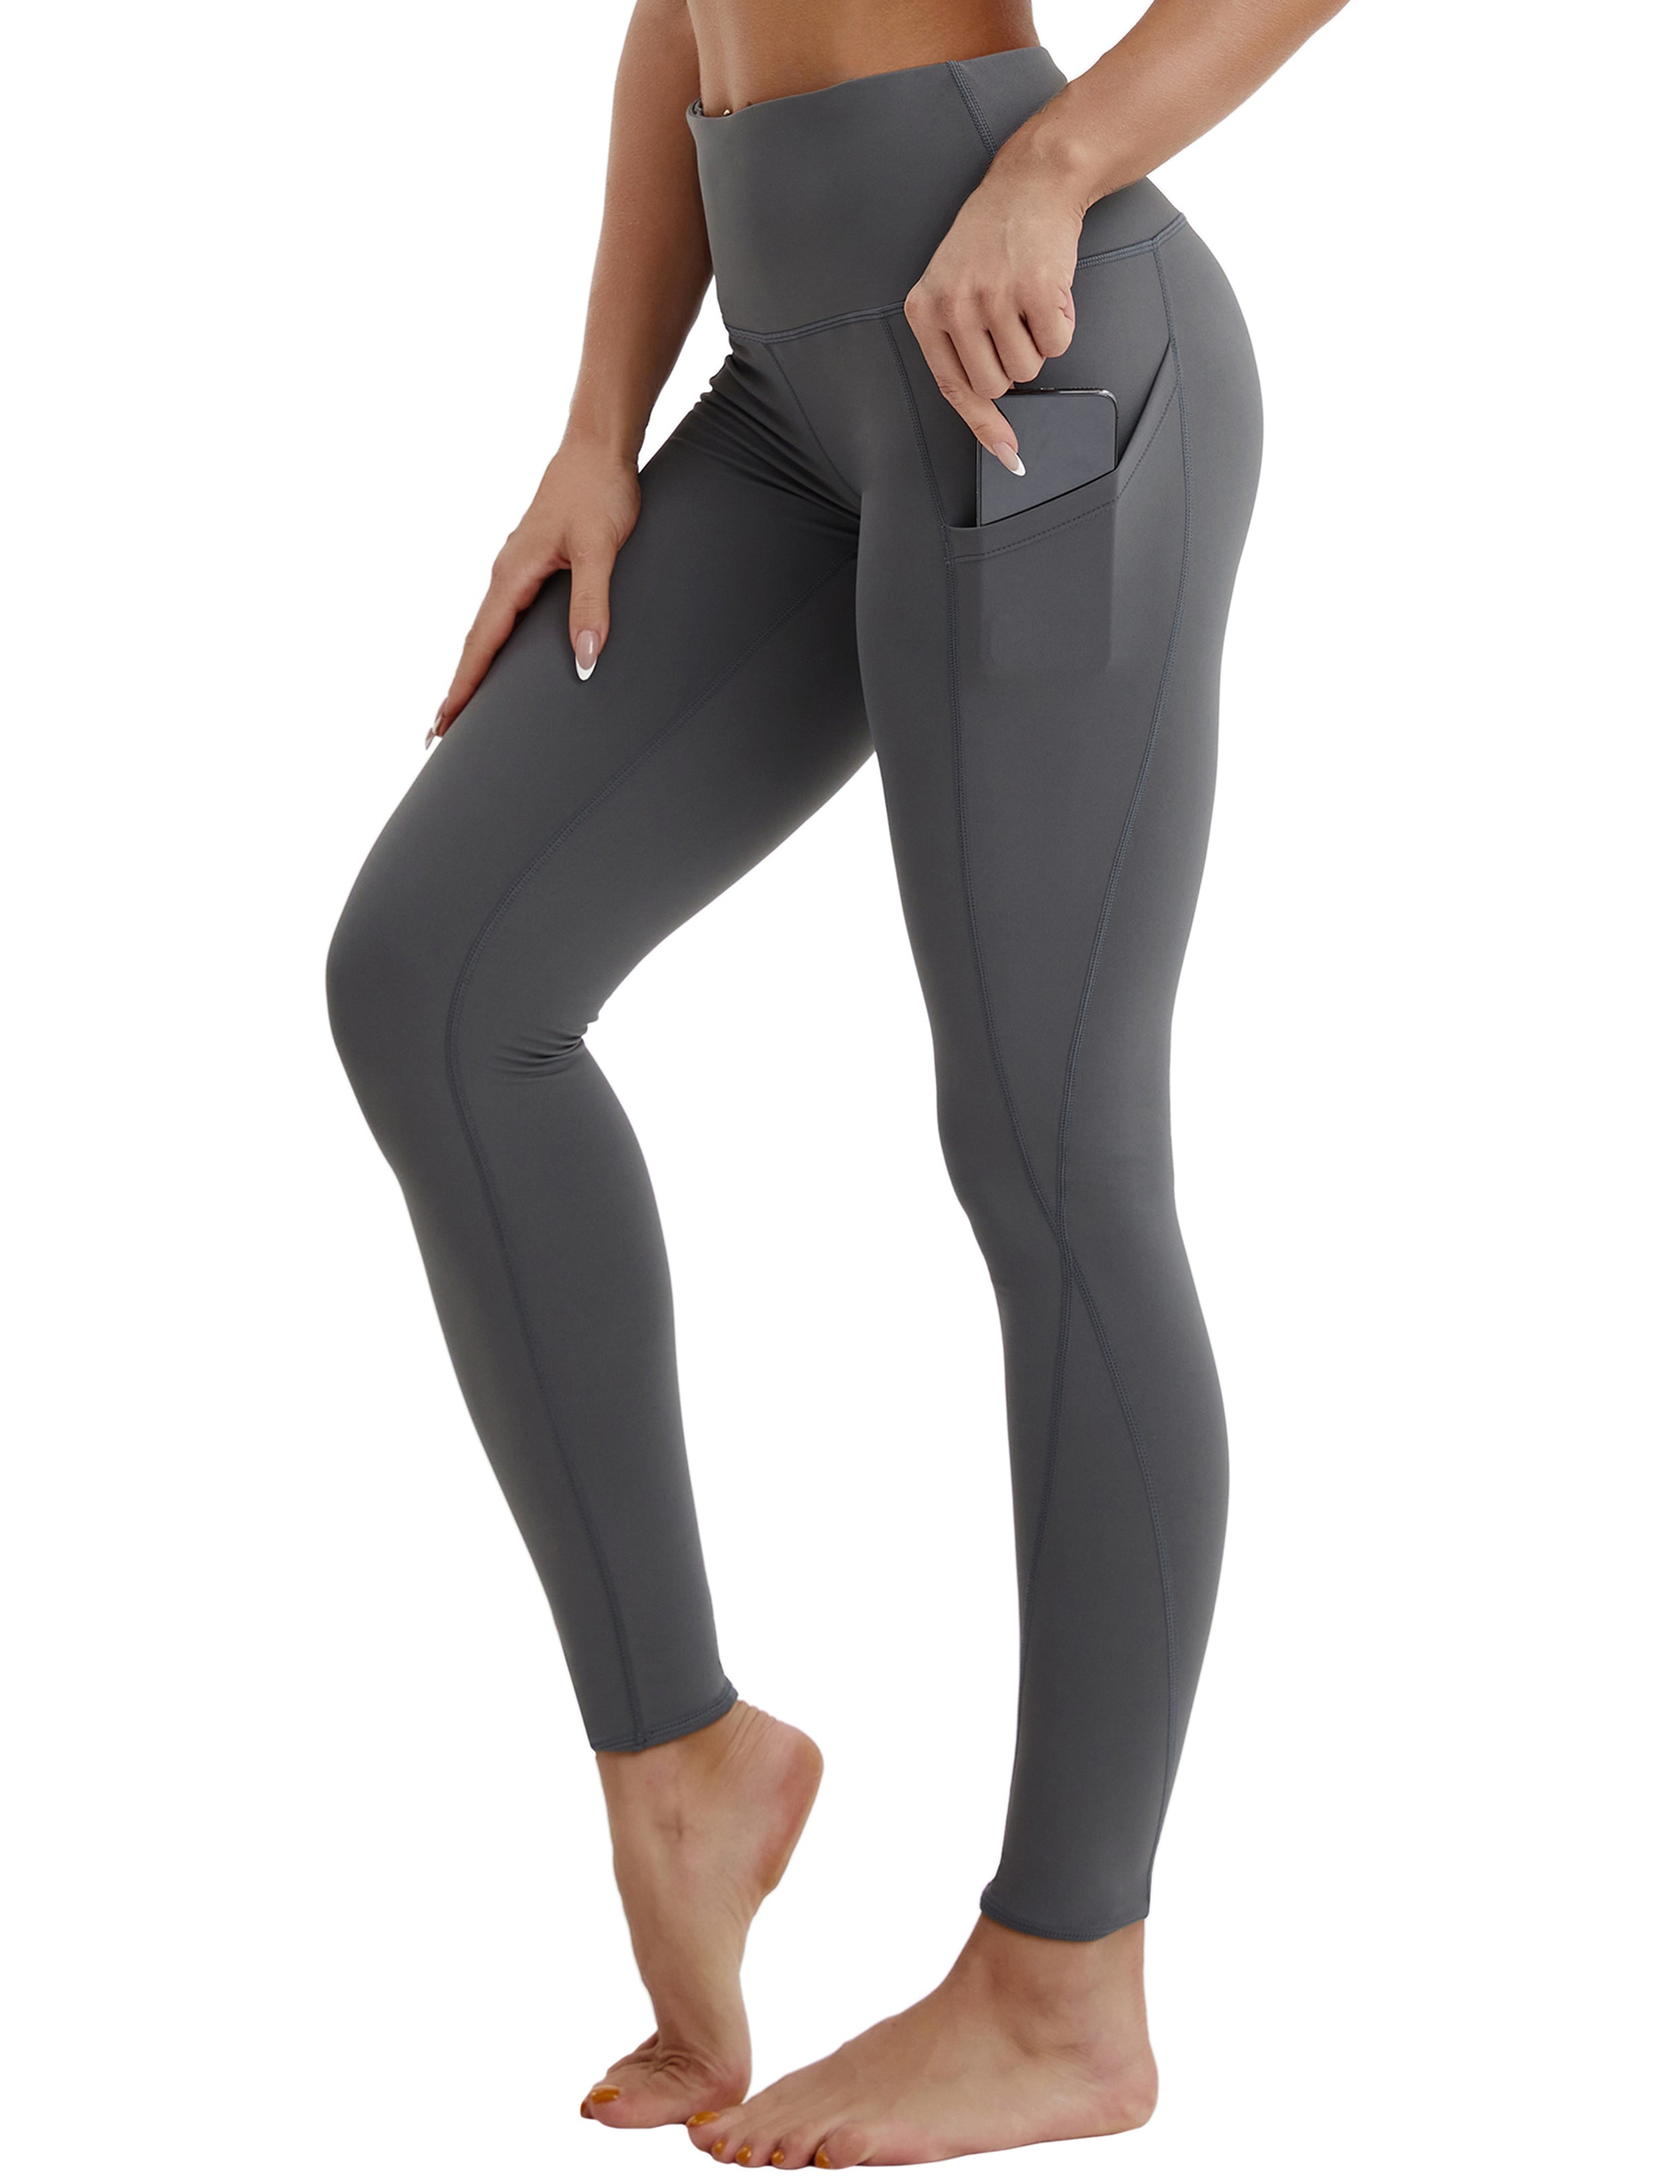 High Waist Side Pockets Biking Pants shadowcharcoal 75% Nylon, 25% Spandex Fabric doesn't attract lint easily 4-way stretch No see-through Moisture-wicking Tummy control Inner pocket